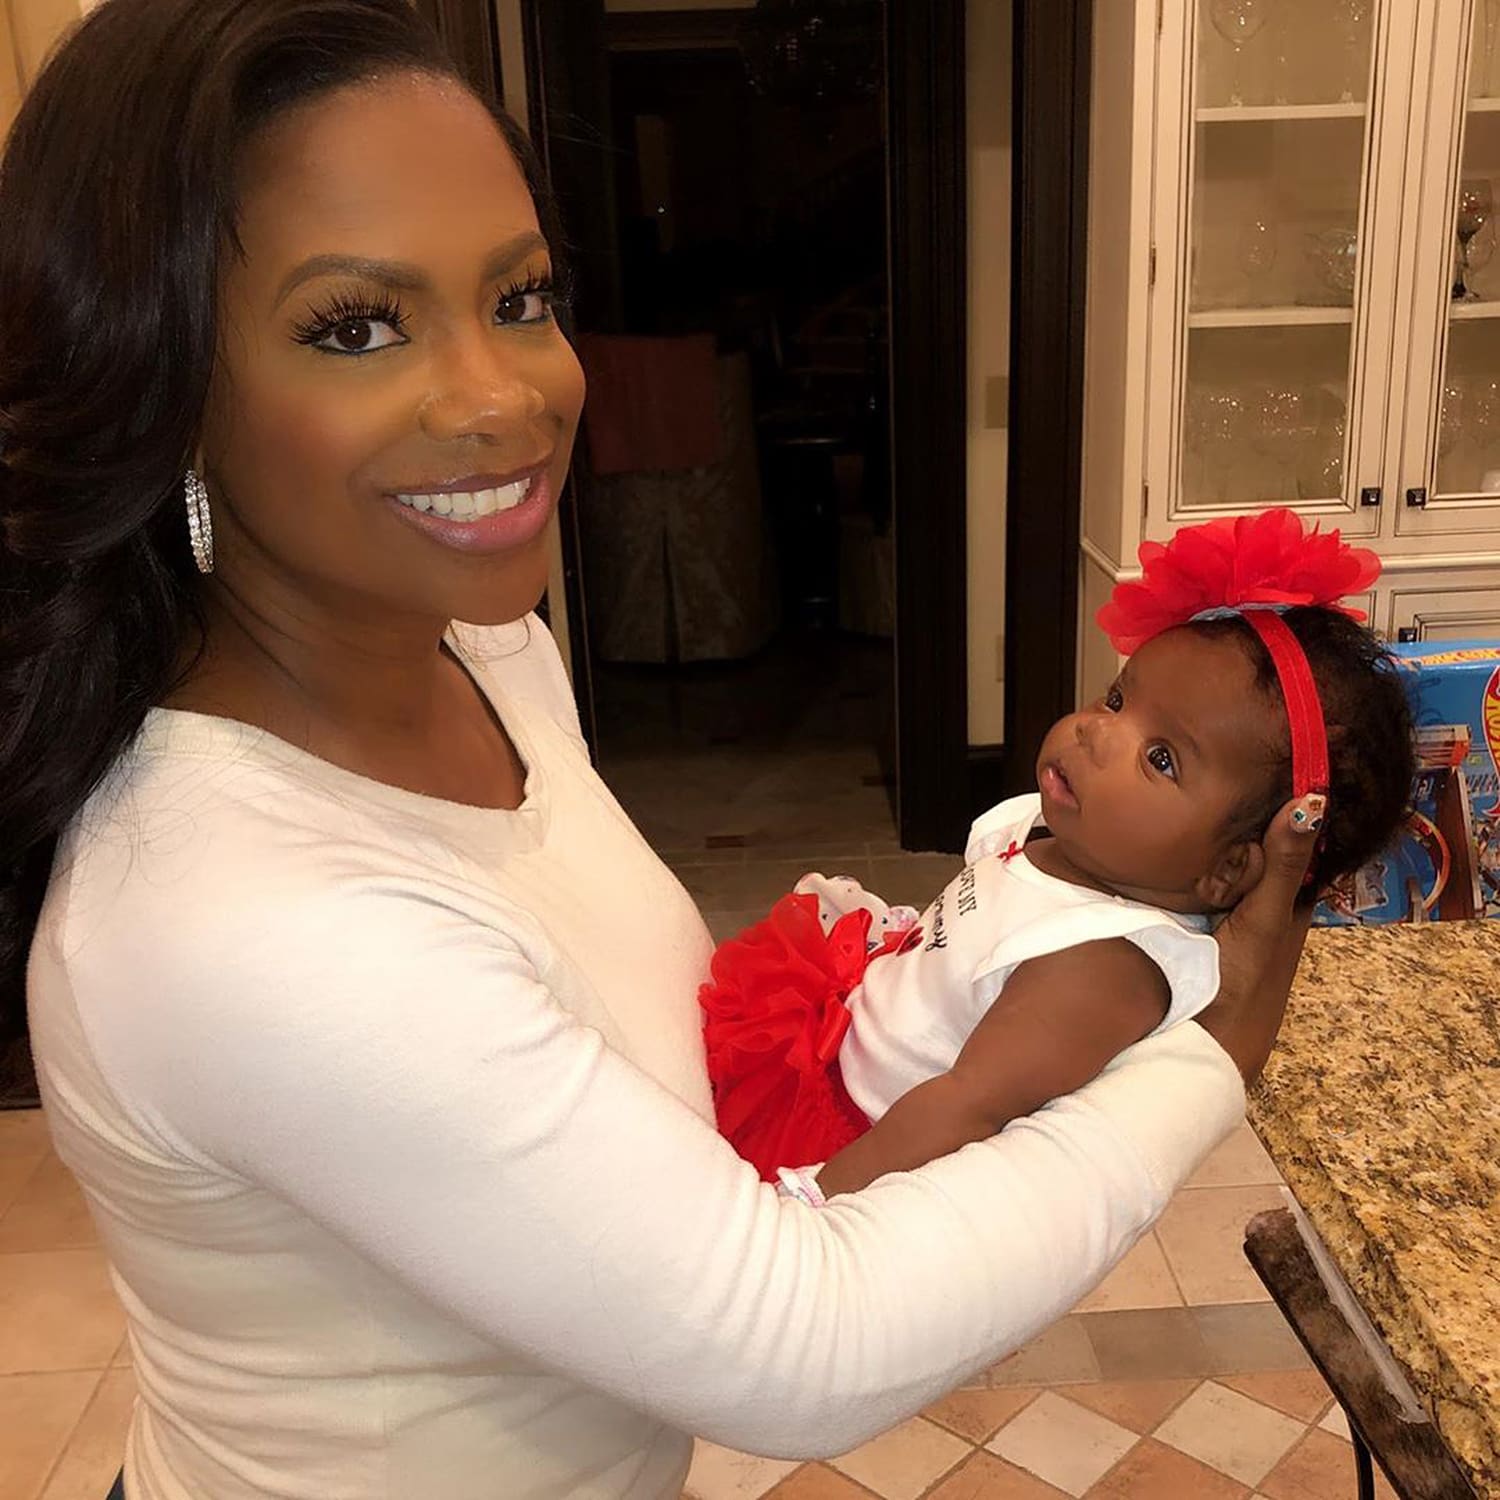 Kandi Burruss Celebrates The Birthday Of Her Baby Girl, Blaze Tucker - She Brings Tears Into Fans' Eyes With This Video